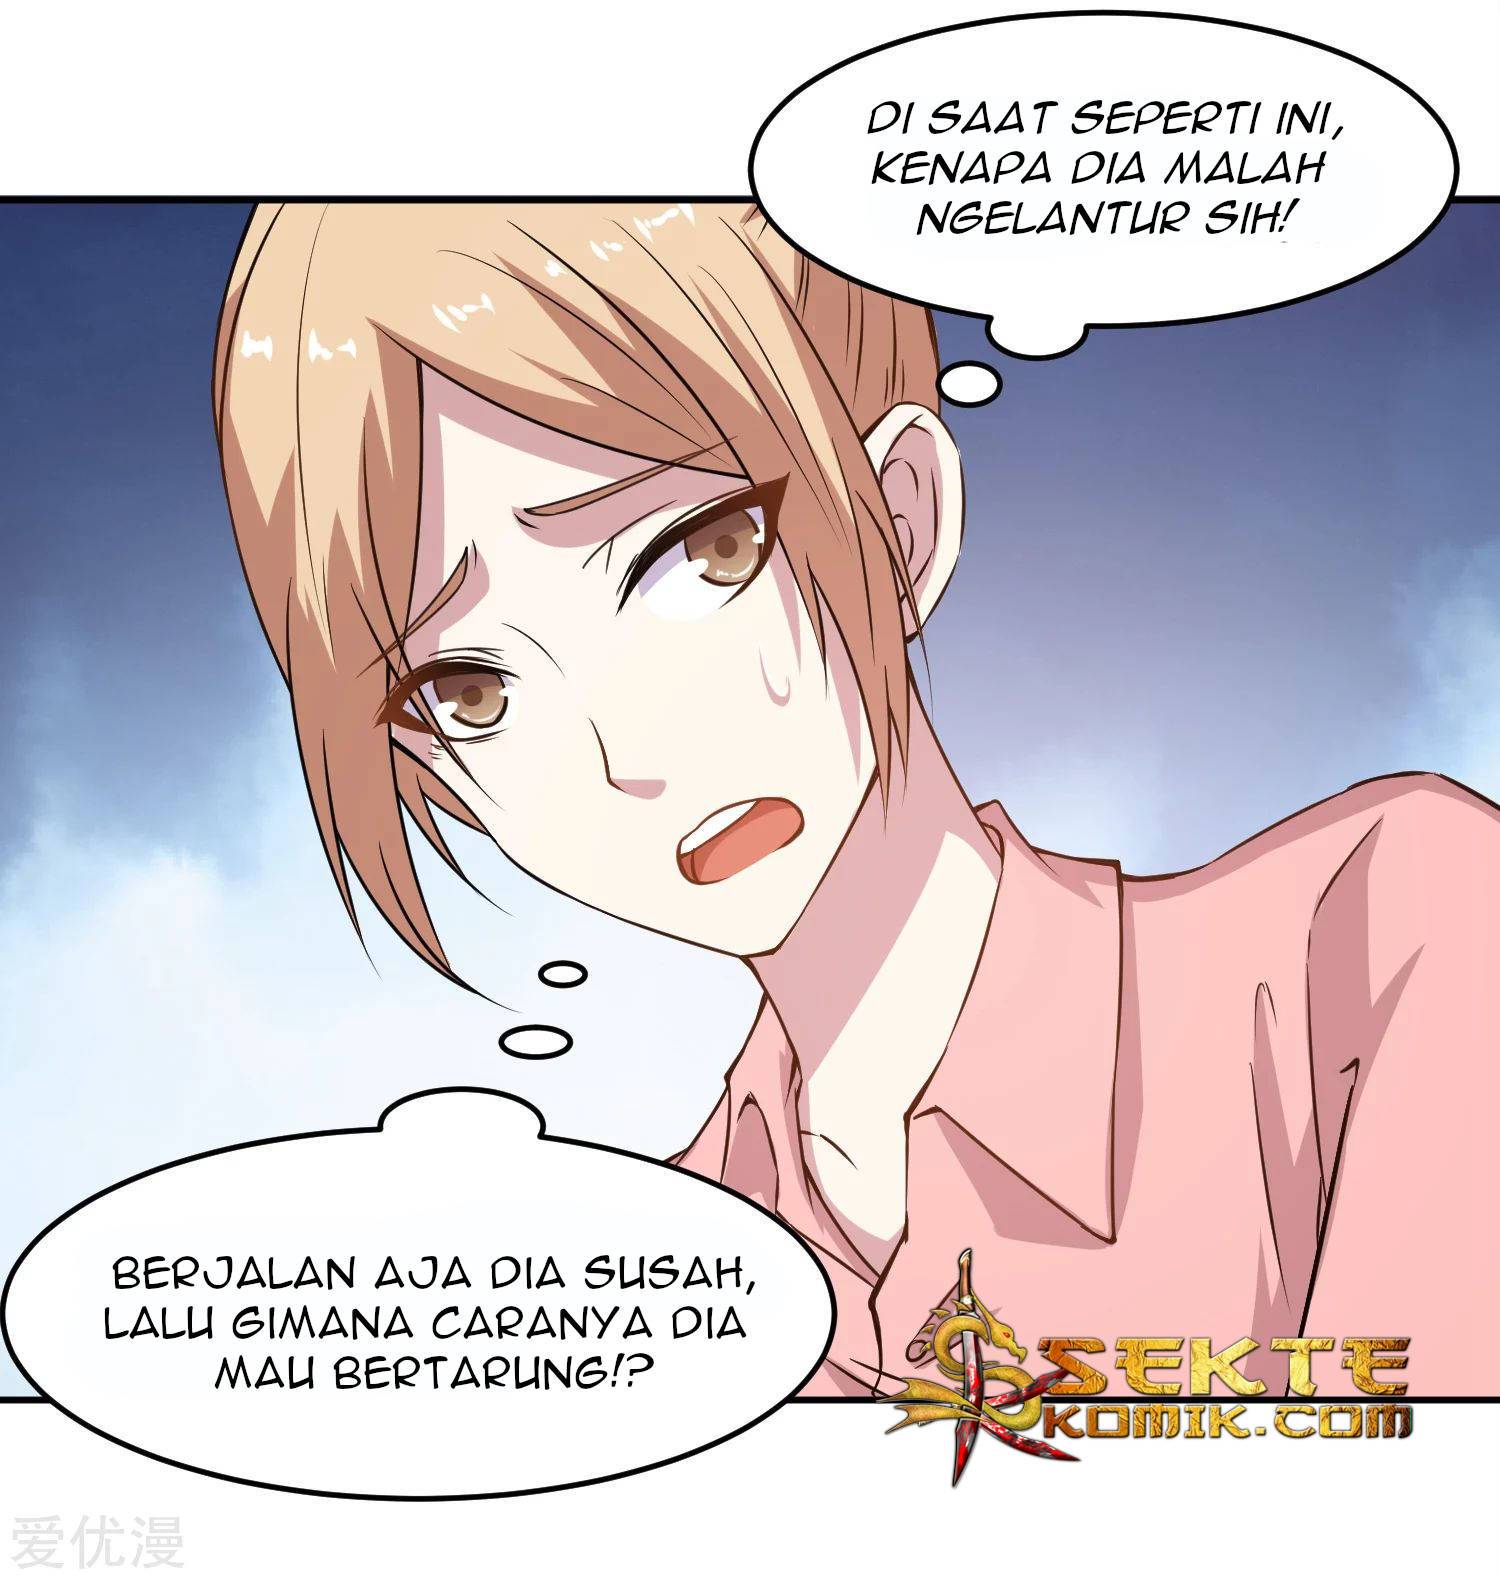 Godly Mobile Game Chapter 08